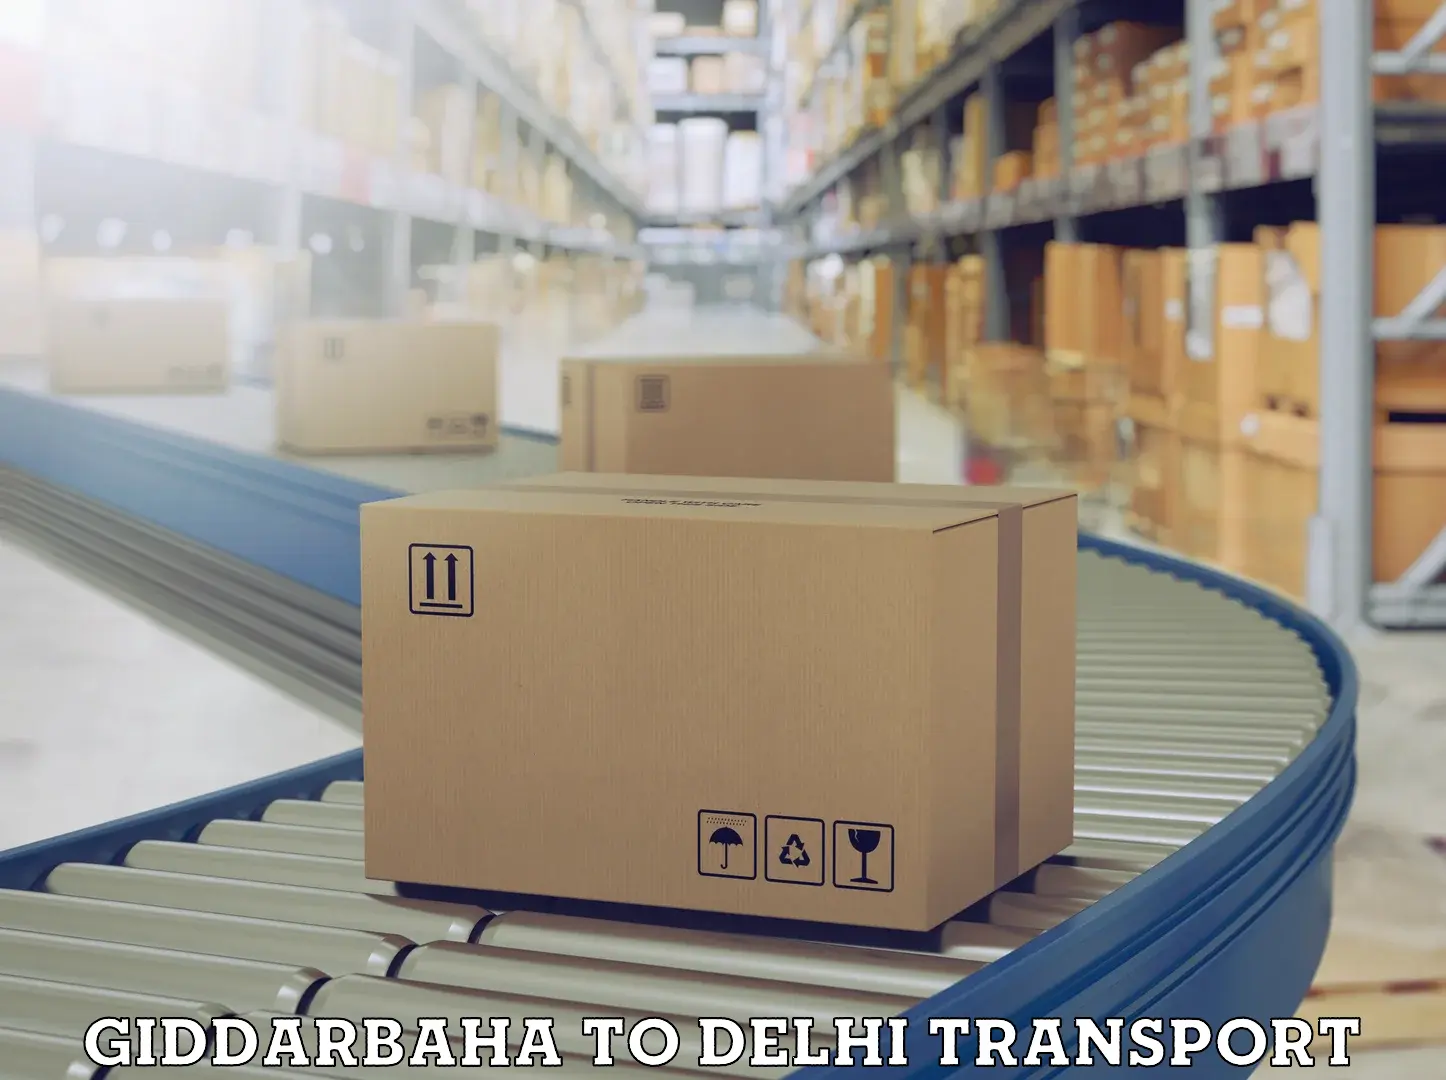 Vehicle transport services Giddarbaha to East Delhi